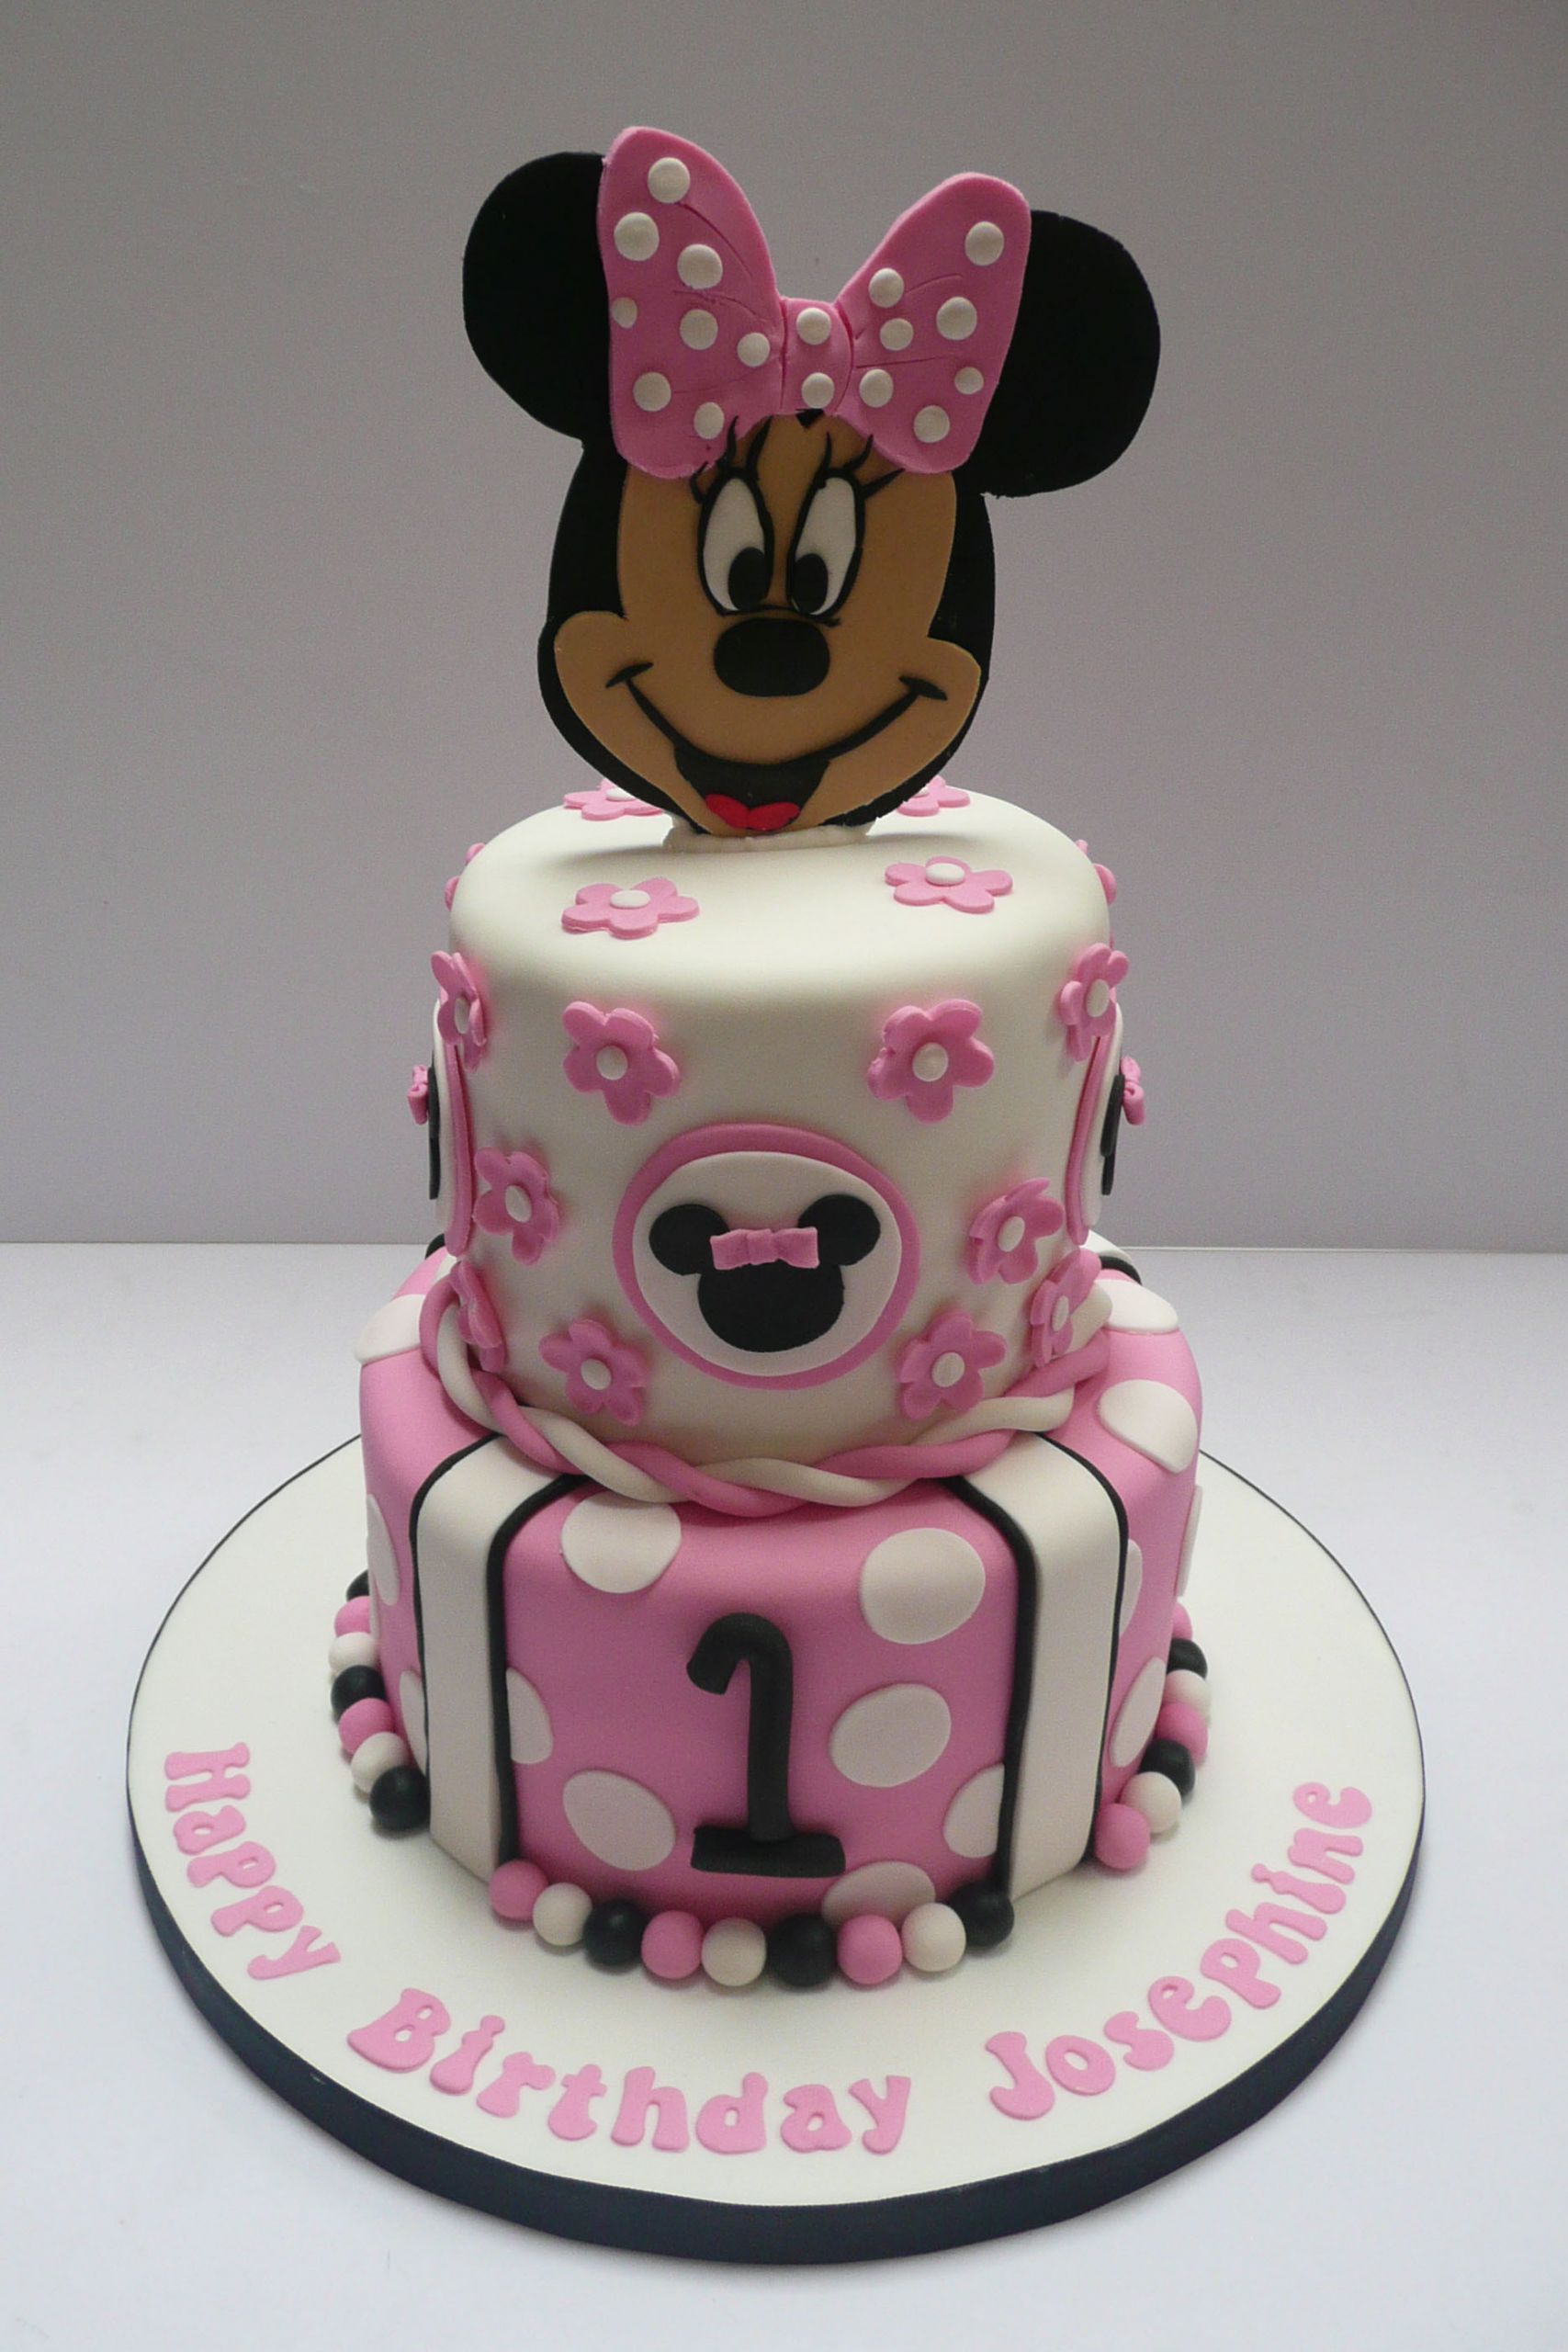 Minnie Mouse Birthday Cake
 Top Cakes from April and May